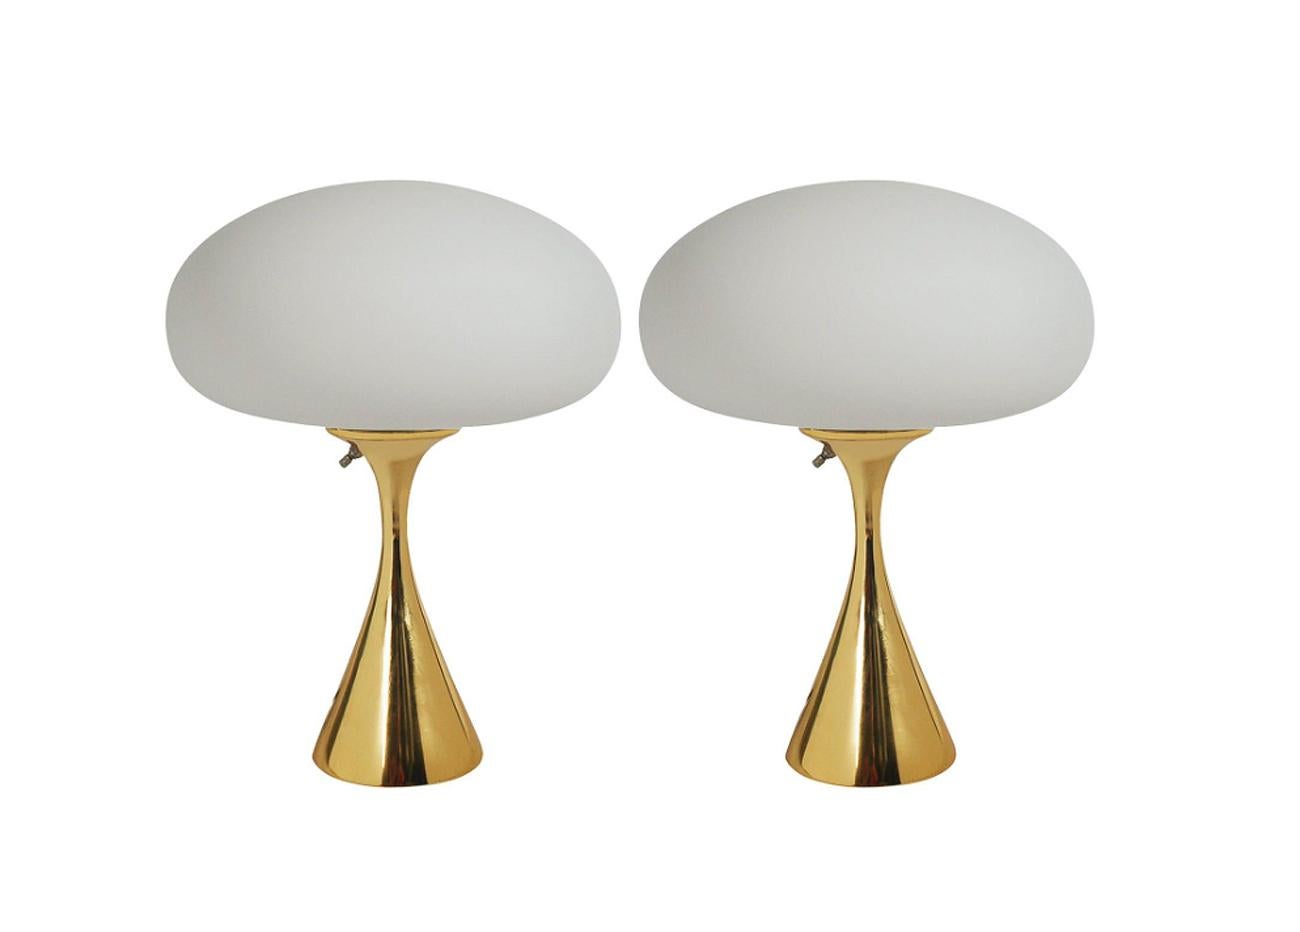 Contemporary Pair of Mid-Century Modern Table Lamps by Designline in Brass & White Glass For Sale